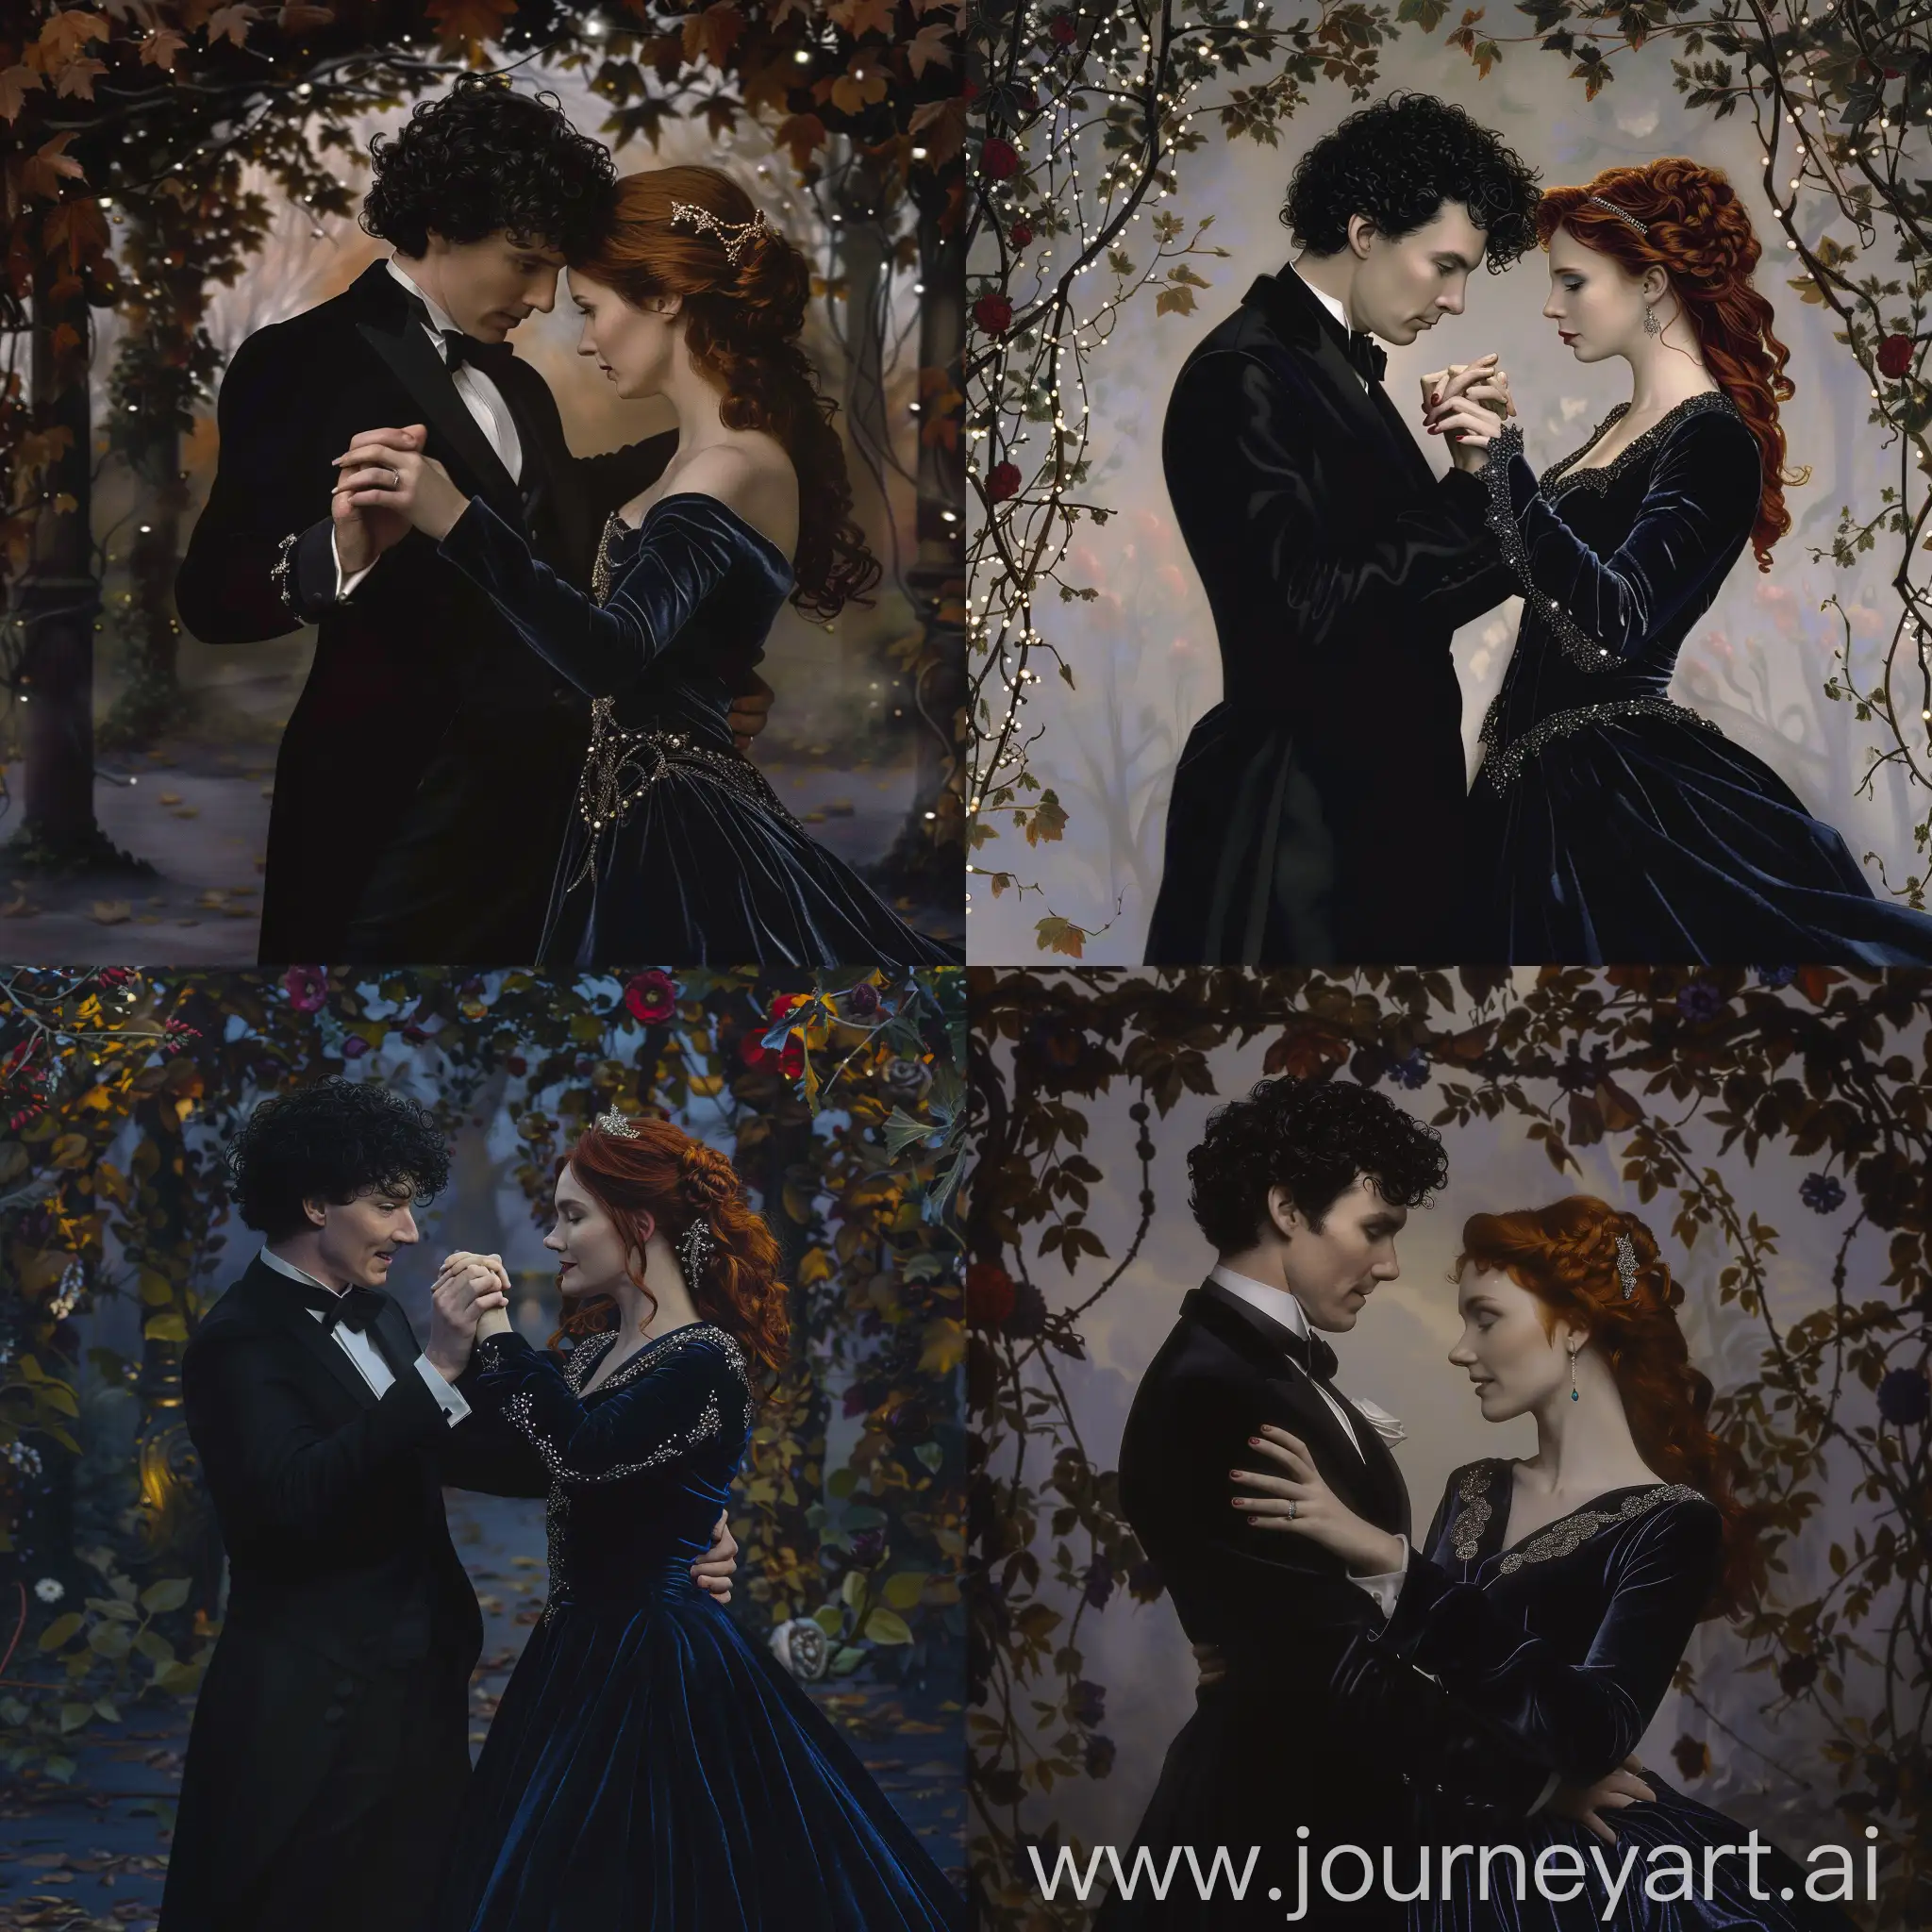 Sherlock Holmes with black curly hair from the BBC series Sherlock in a black tuxedo waltzes with a red-haired woman in a dark blue velvet dress embroidered with beads in the evening in a park decorated with floral vines